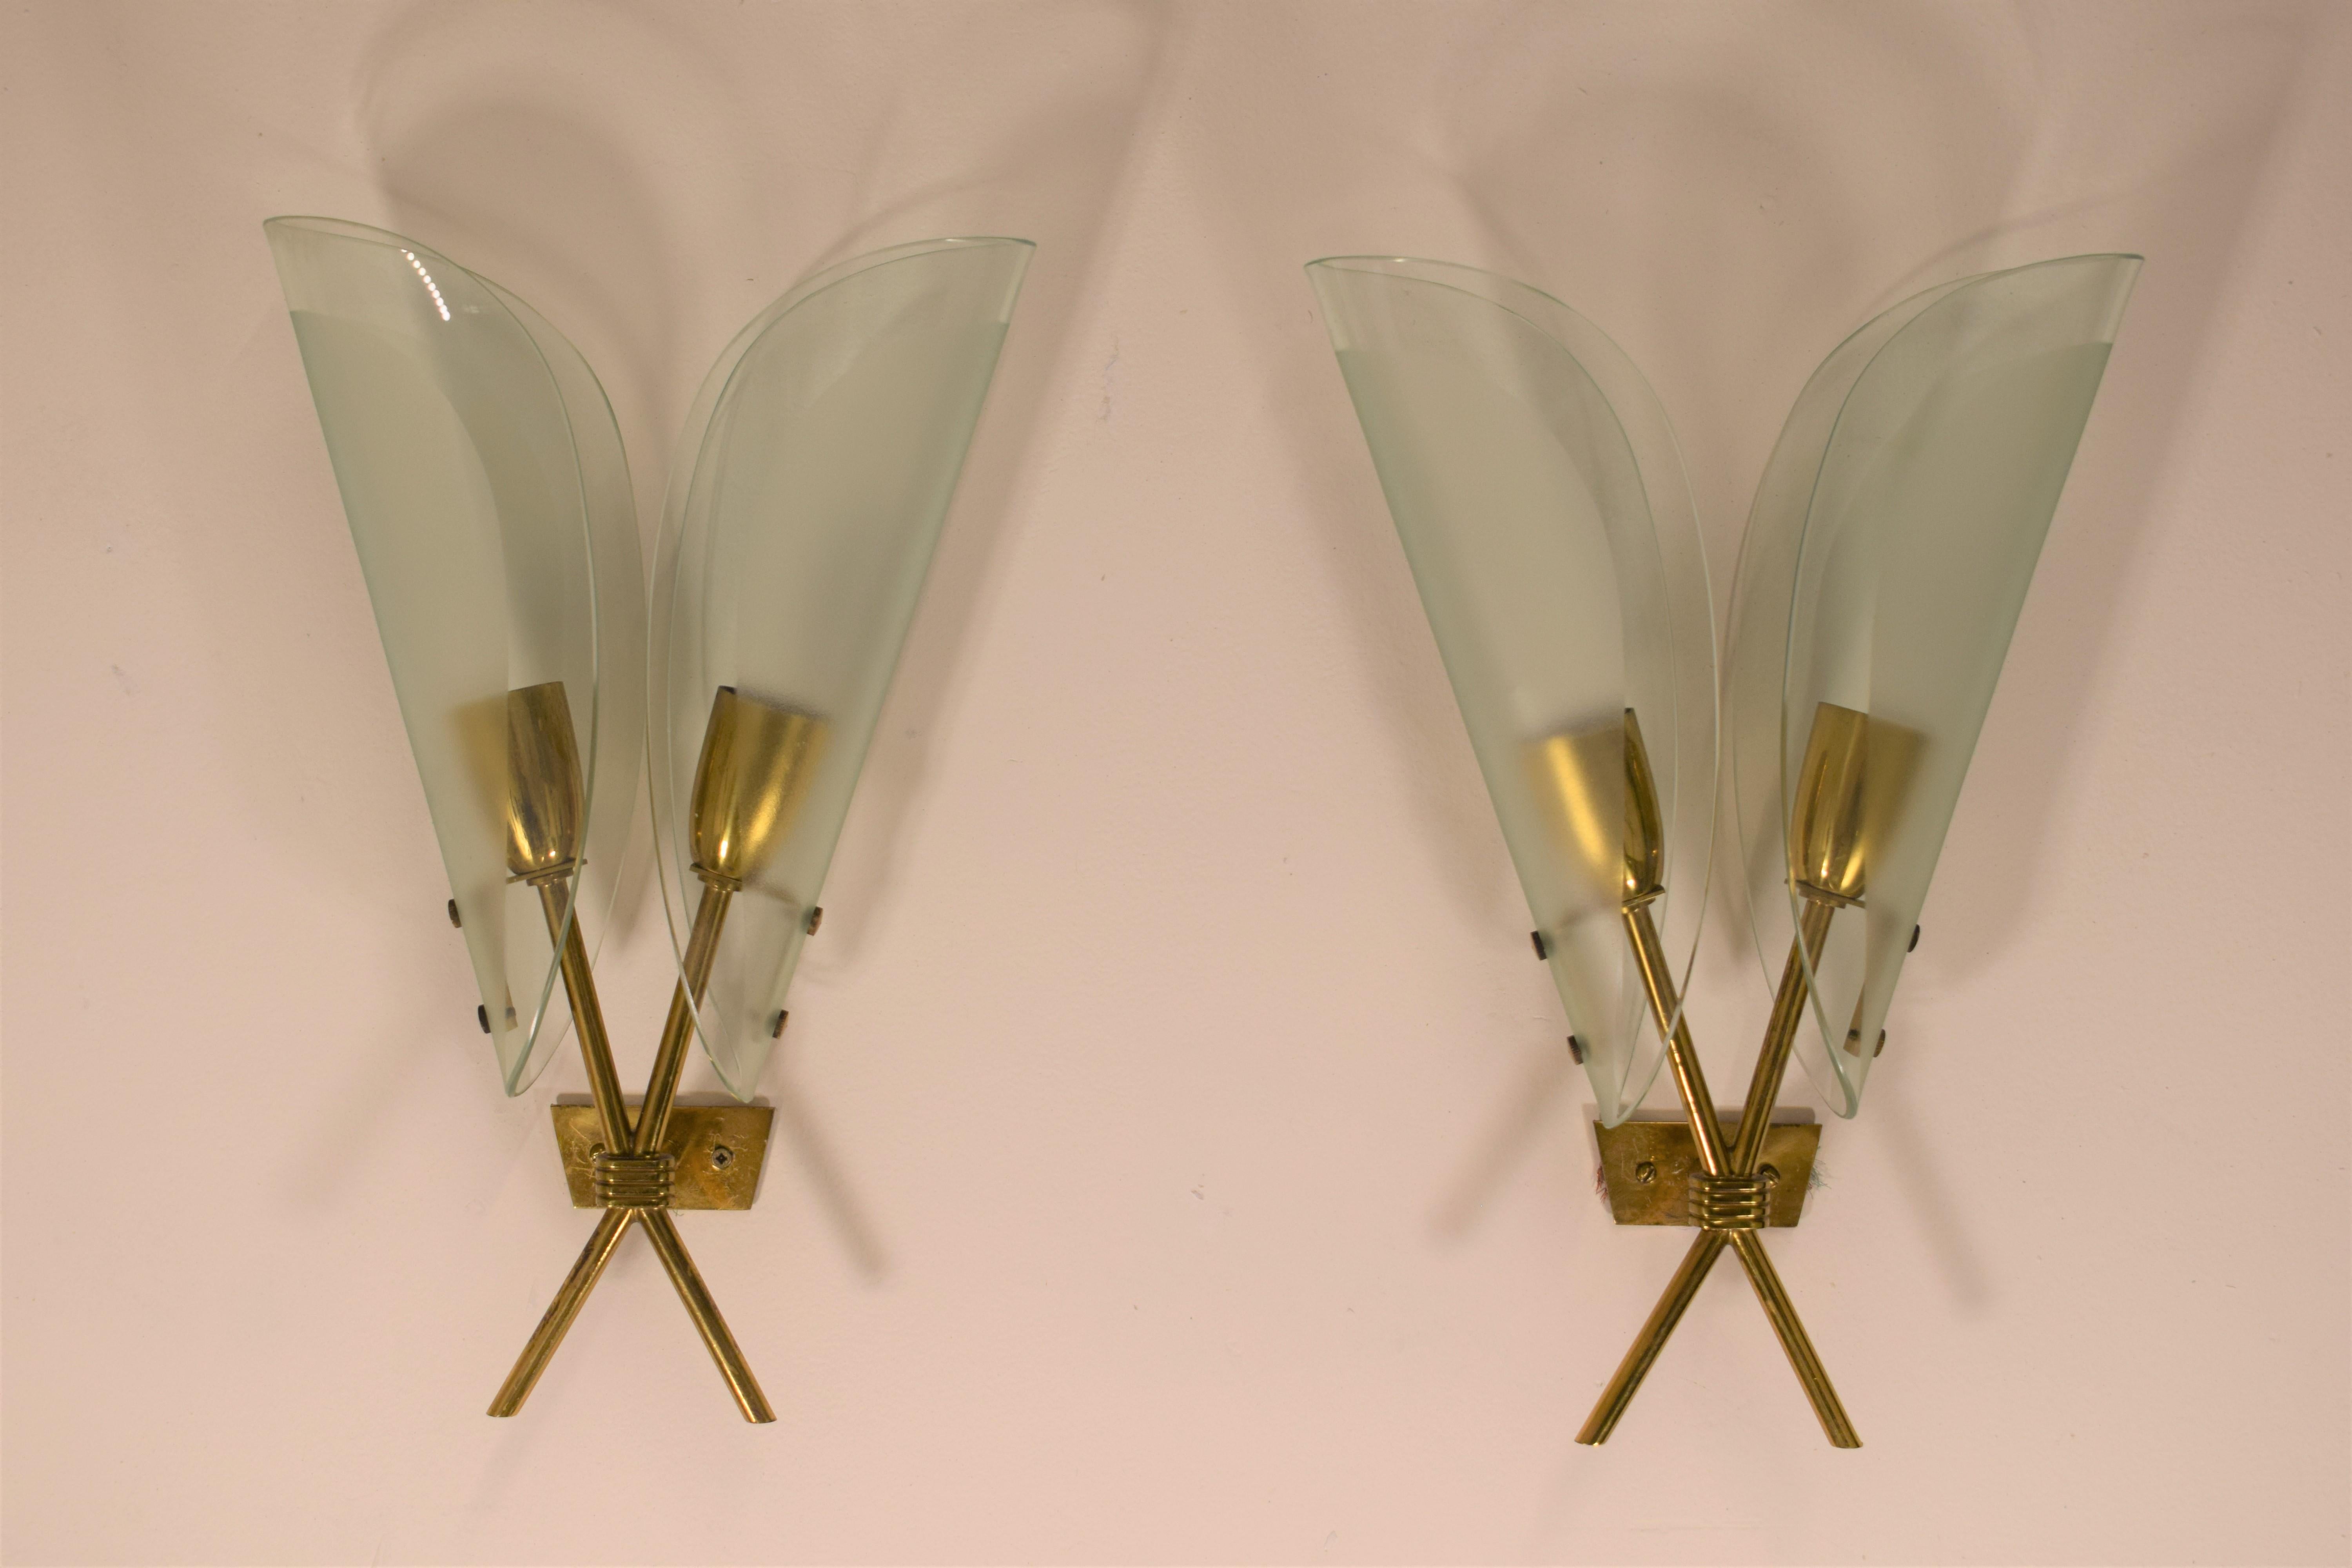 Pair of Italian sconces, brass and glass, 1950s.
Dimensions: H= 31 cm; W= 21 cm; D= 8 cm.